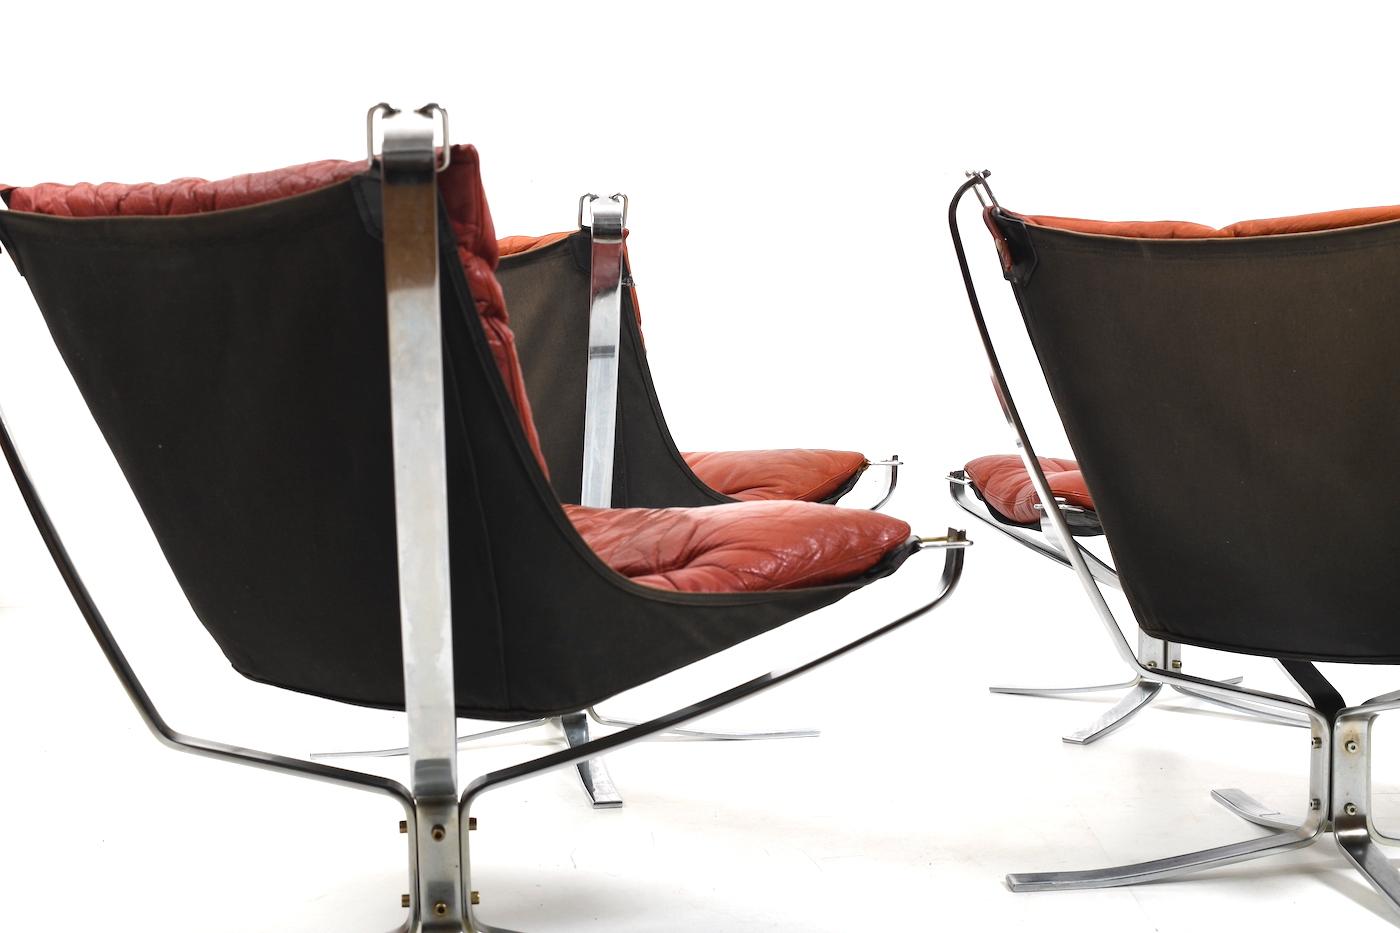 Sigurd Ressell set of 2 Falcon lounge chairs and 1 ottoman in Indian red leather and chrome base. Designed 1971 for Vatne Møbler Norway.
This set is fproduced early 1970s. In beautiful vintage condition with patinated „Indian Red“ leather. 
-
H. 82